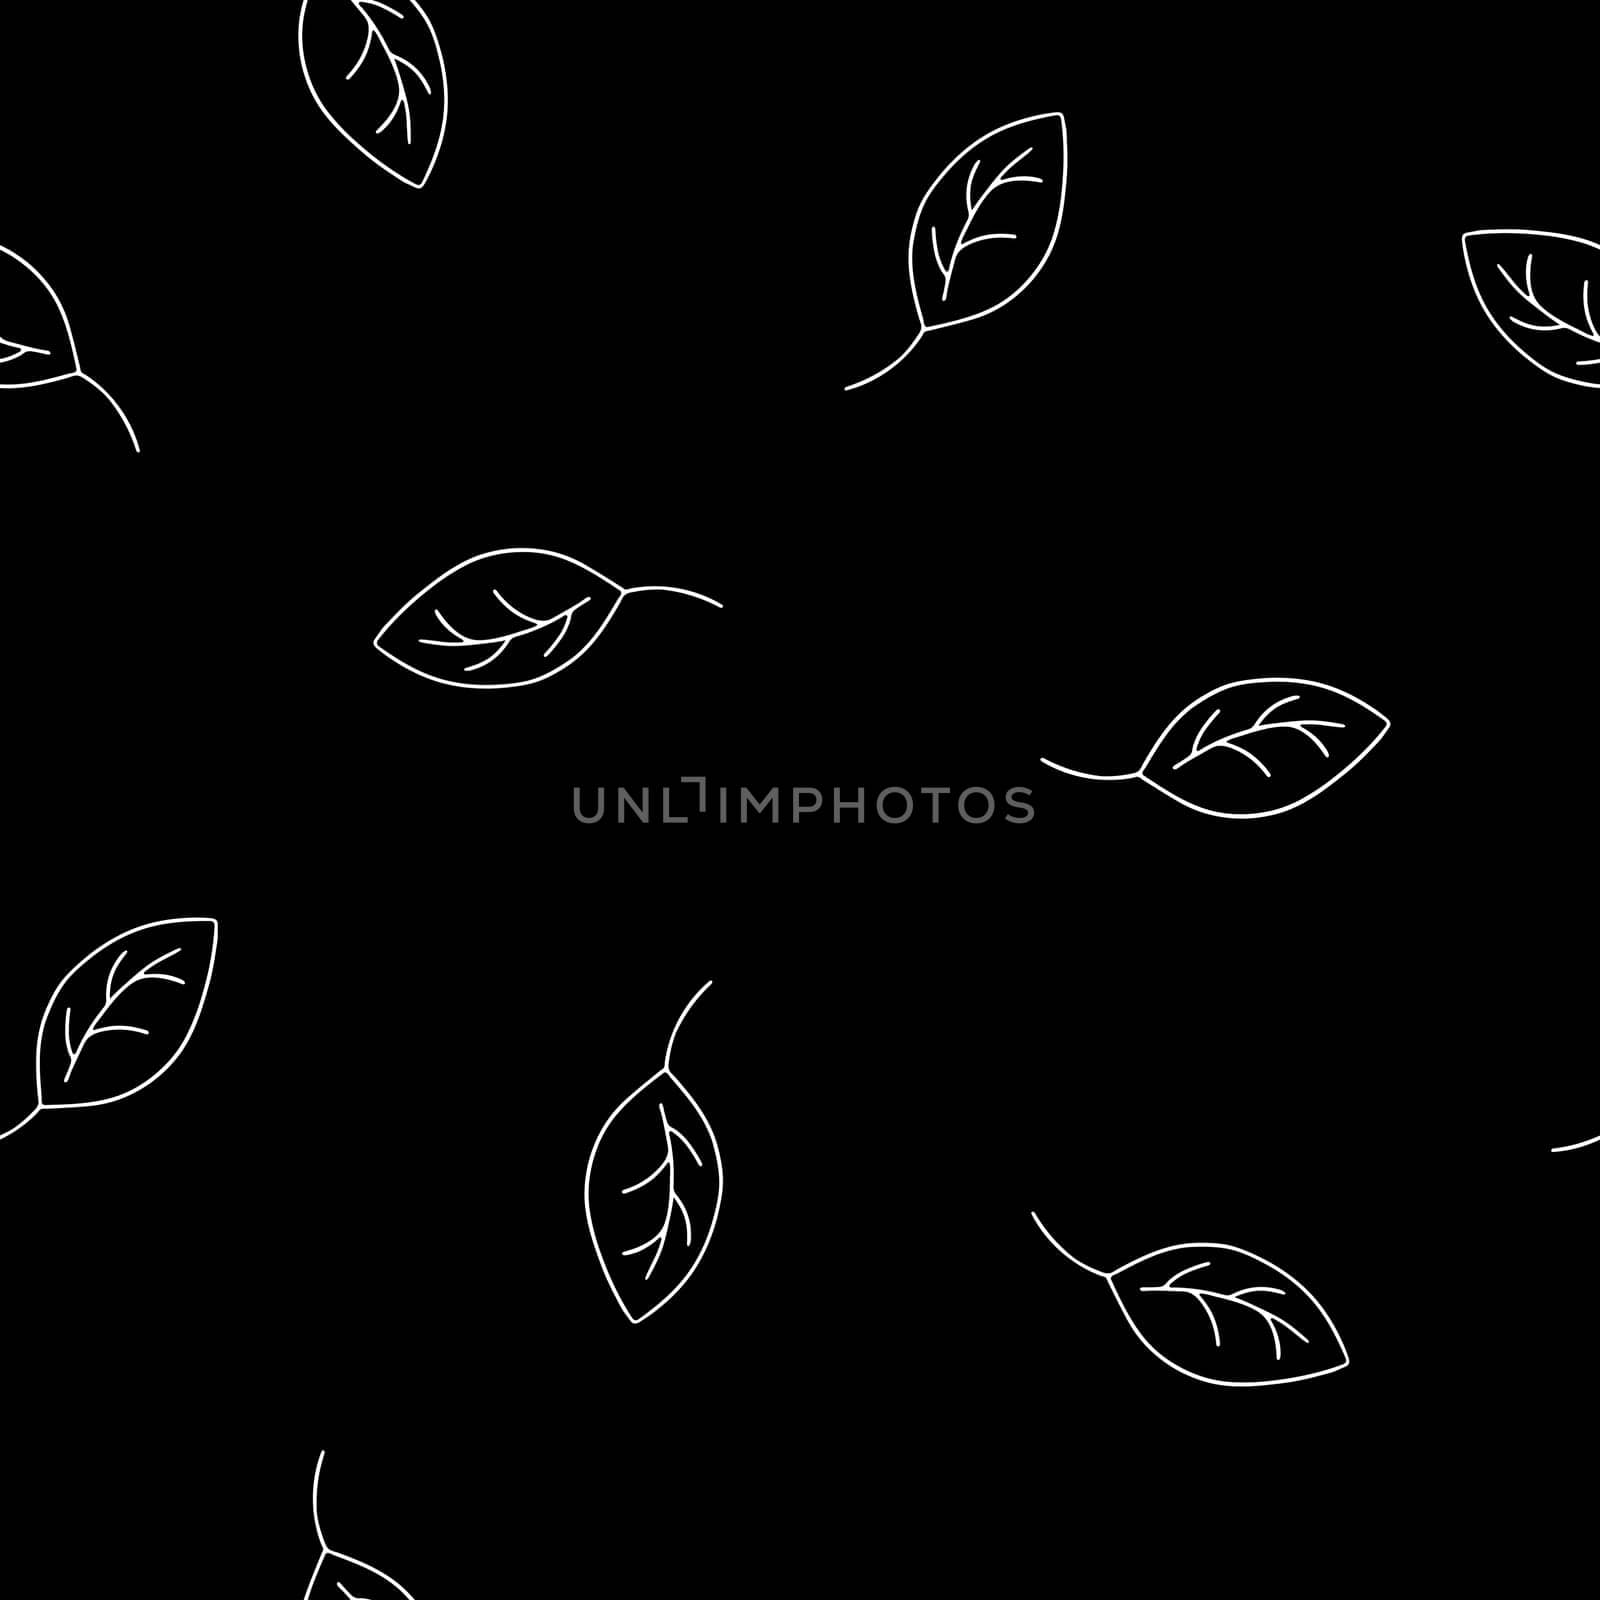 Seamless Pattern with Hand Drawn Black and White Leaves. Autumn Falling Digital Paper with Leaf in Sketched Style. Background with Contour Leaves. Cover for Eco, Organic, Vegan Design.